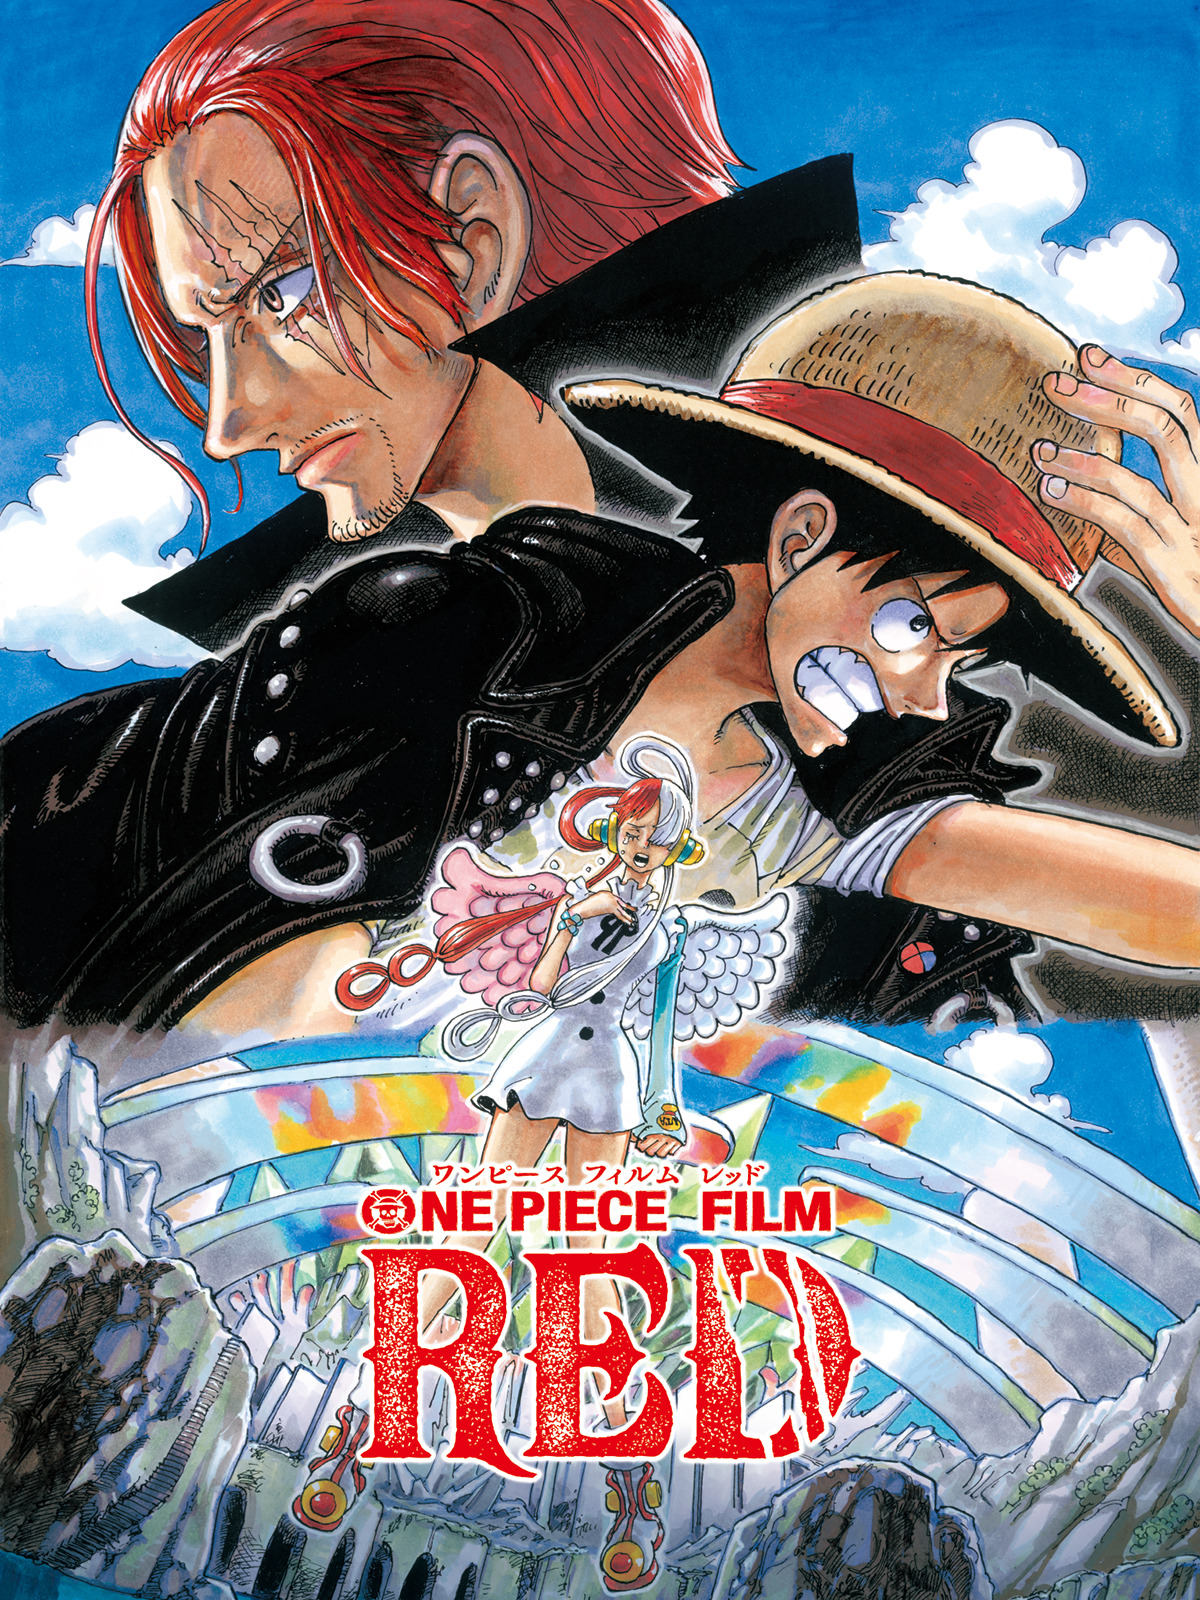 ONE PIECE FILM RED」Prime Video配信が3月8日より開始！ 尾田栄一郎が